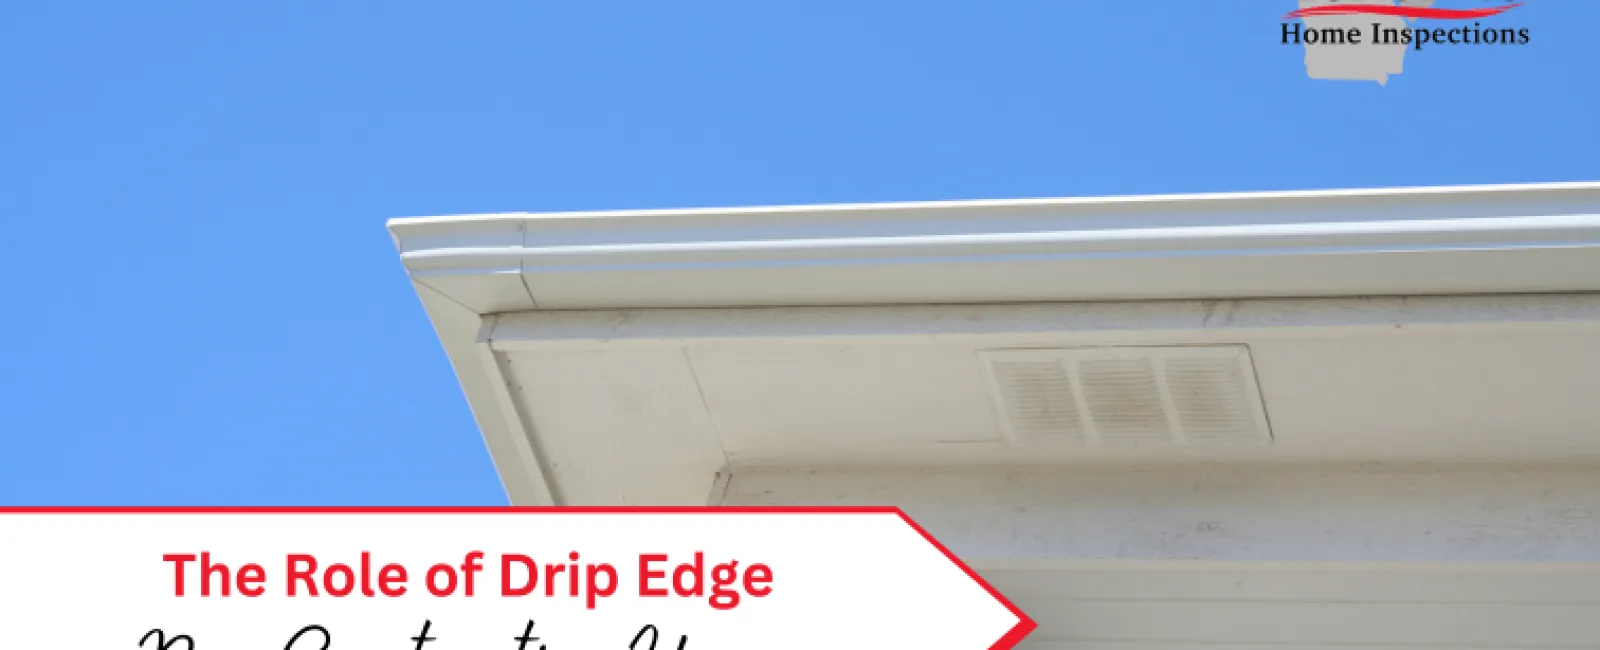 The Role of Drip Edge in New Construction Homes